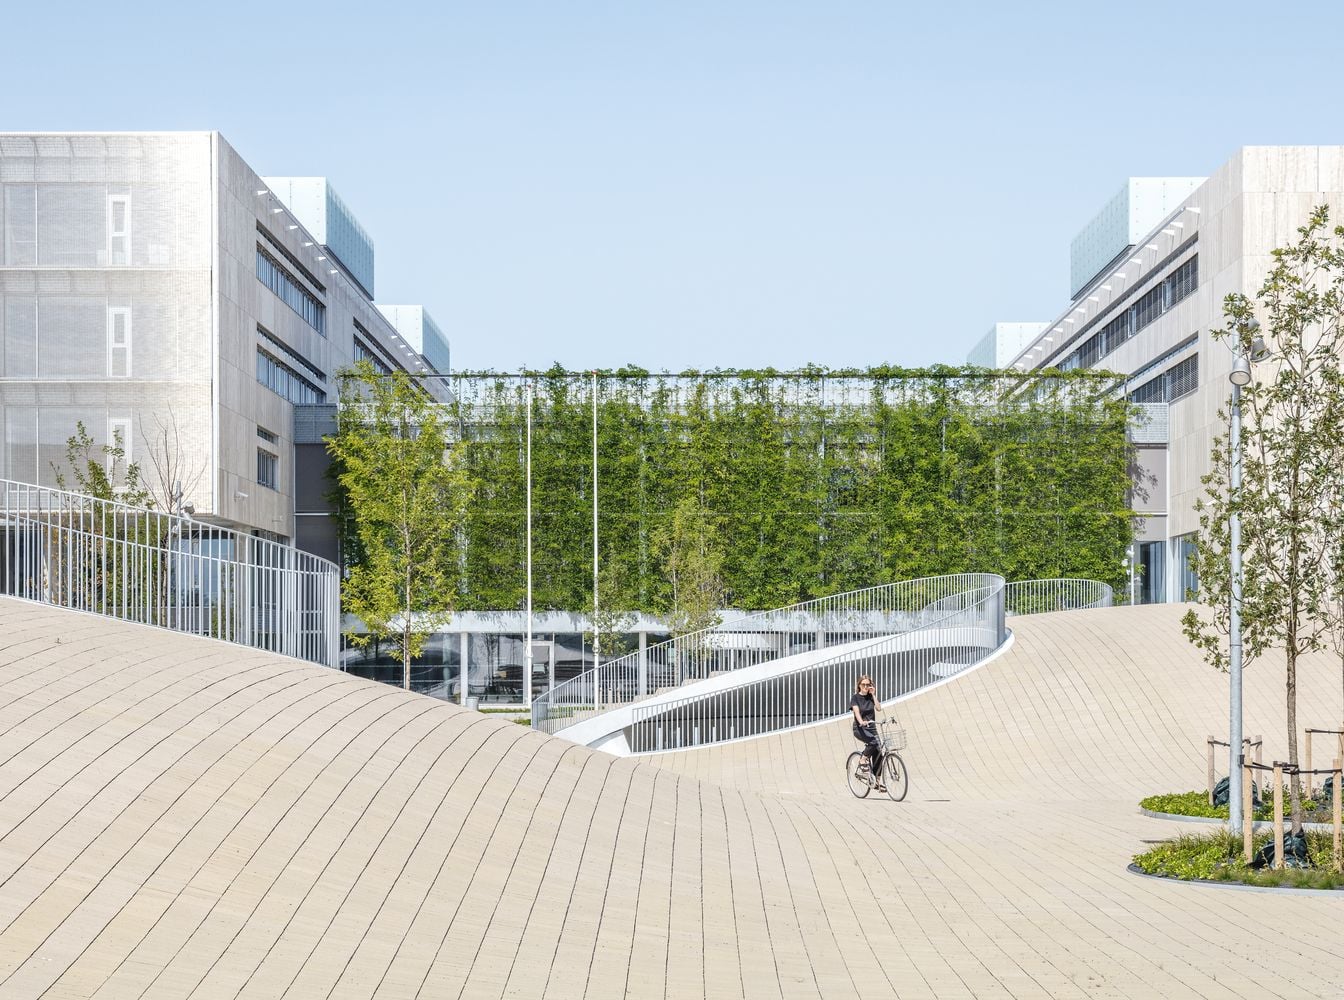 The expansive undulating courtyard that sits above the Karen Blixens Plads' bike parking area